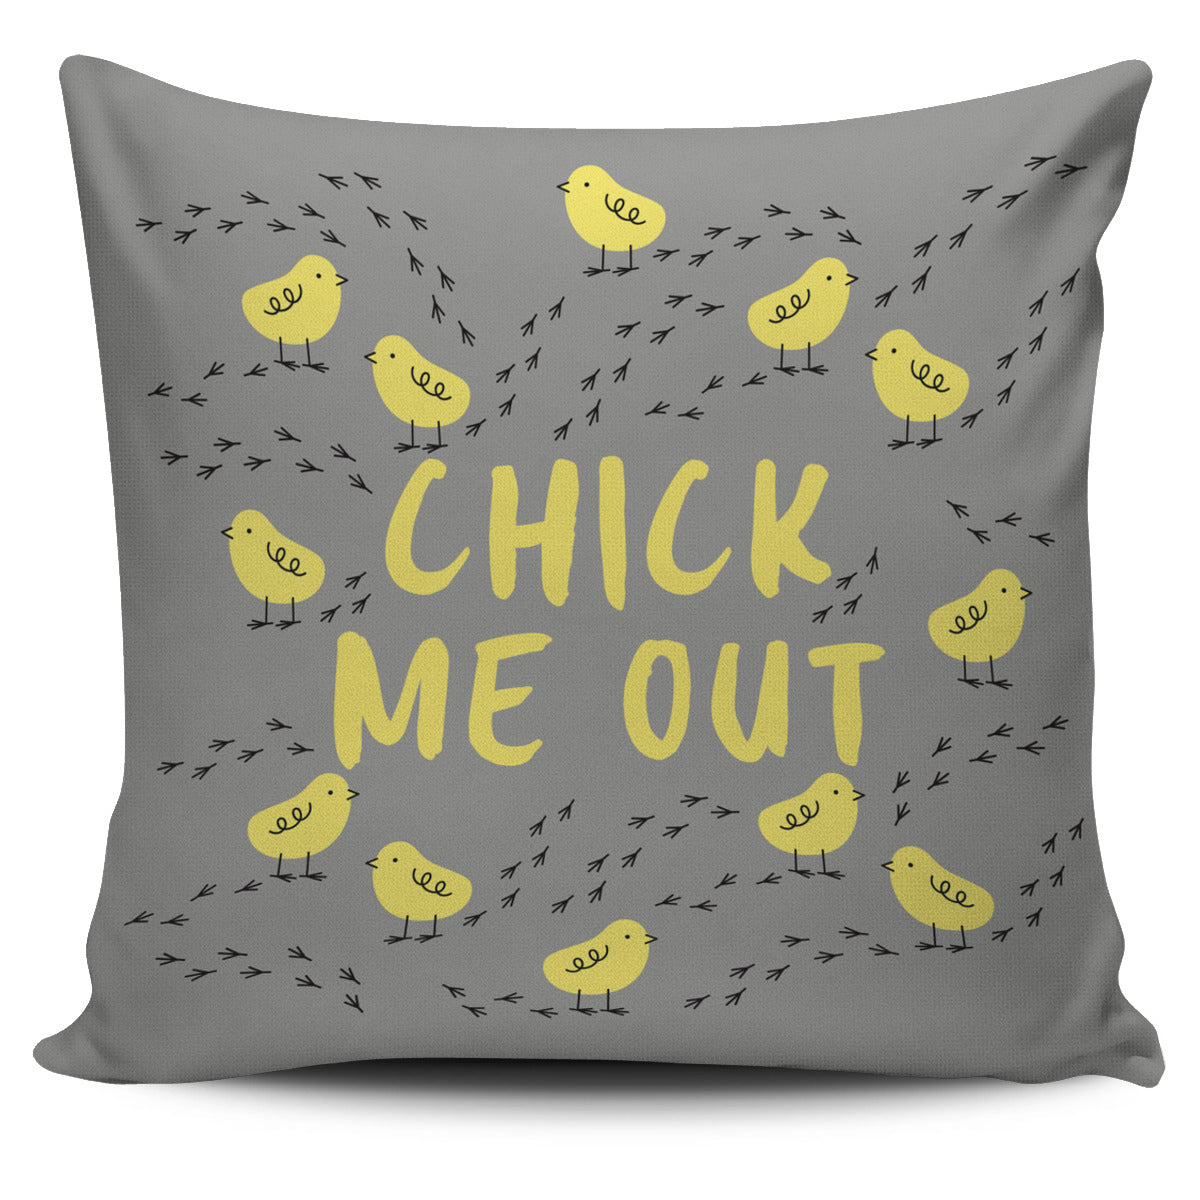 Chick Me Out Pillow Cover